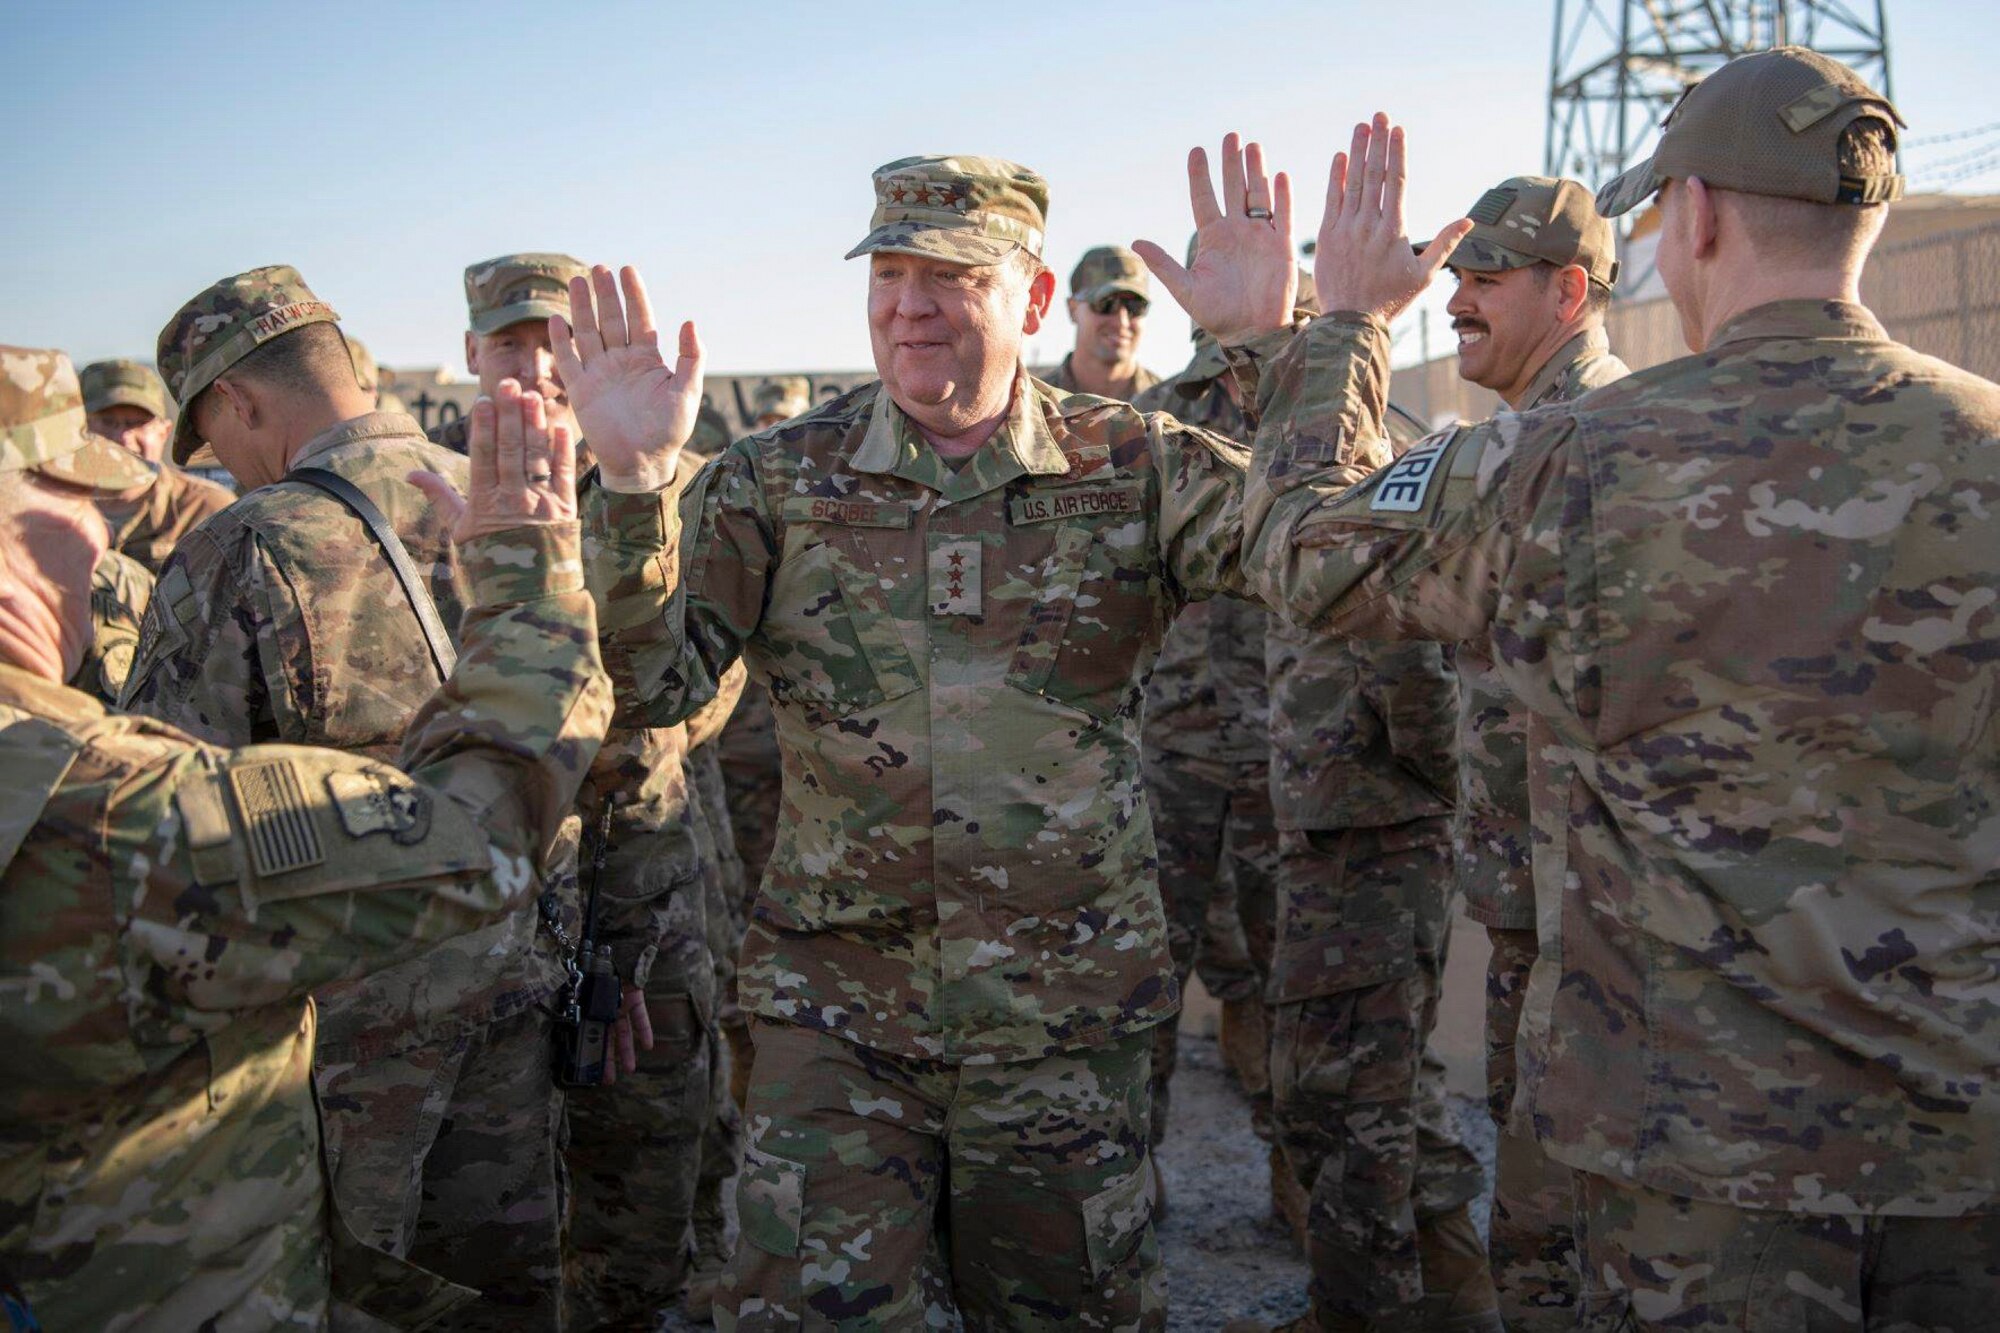 Lt. Gen. Richard Scobee, high-fives deployed members of his Air Force Reserve family. (U.S. Air Force Photo by Tech. Sgt. Robert Cloys)